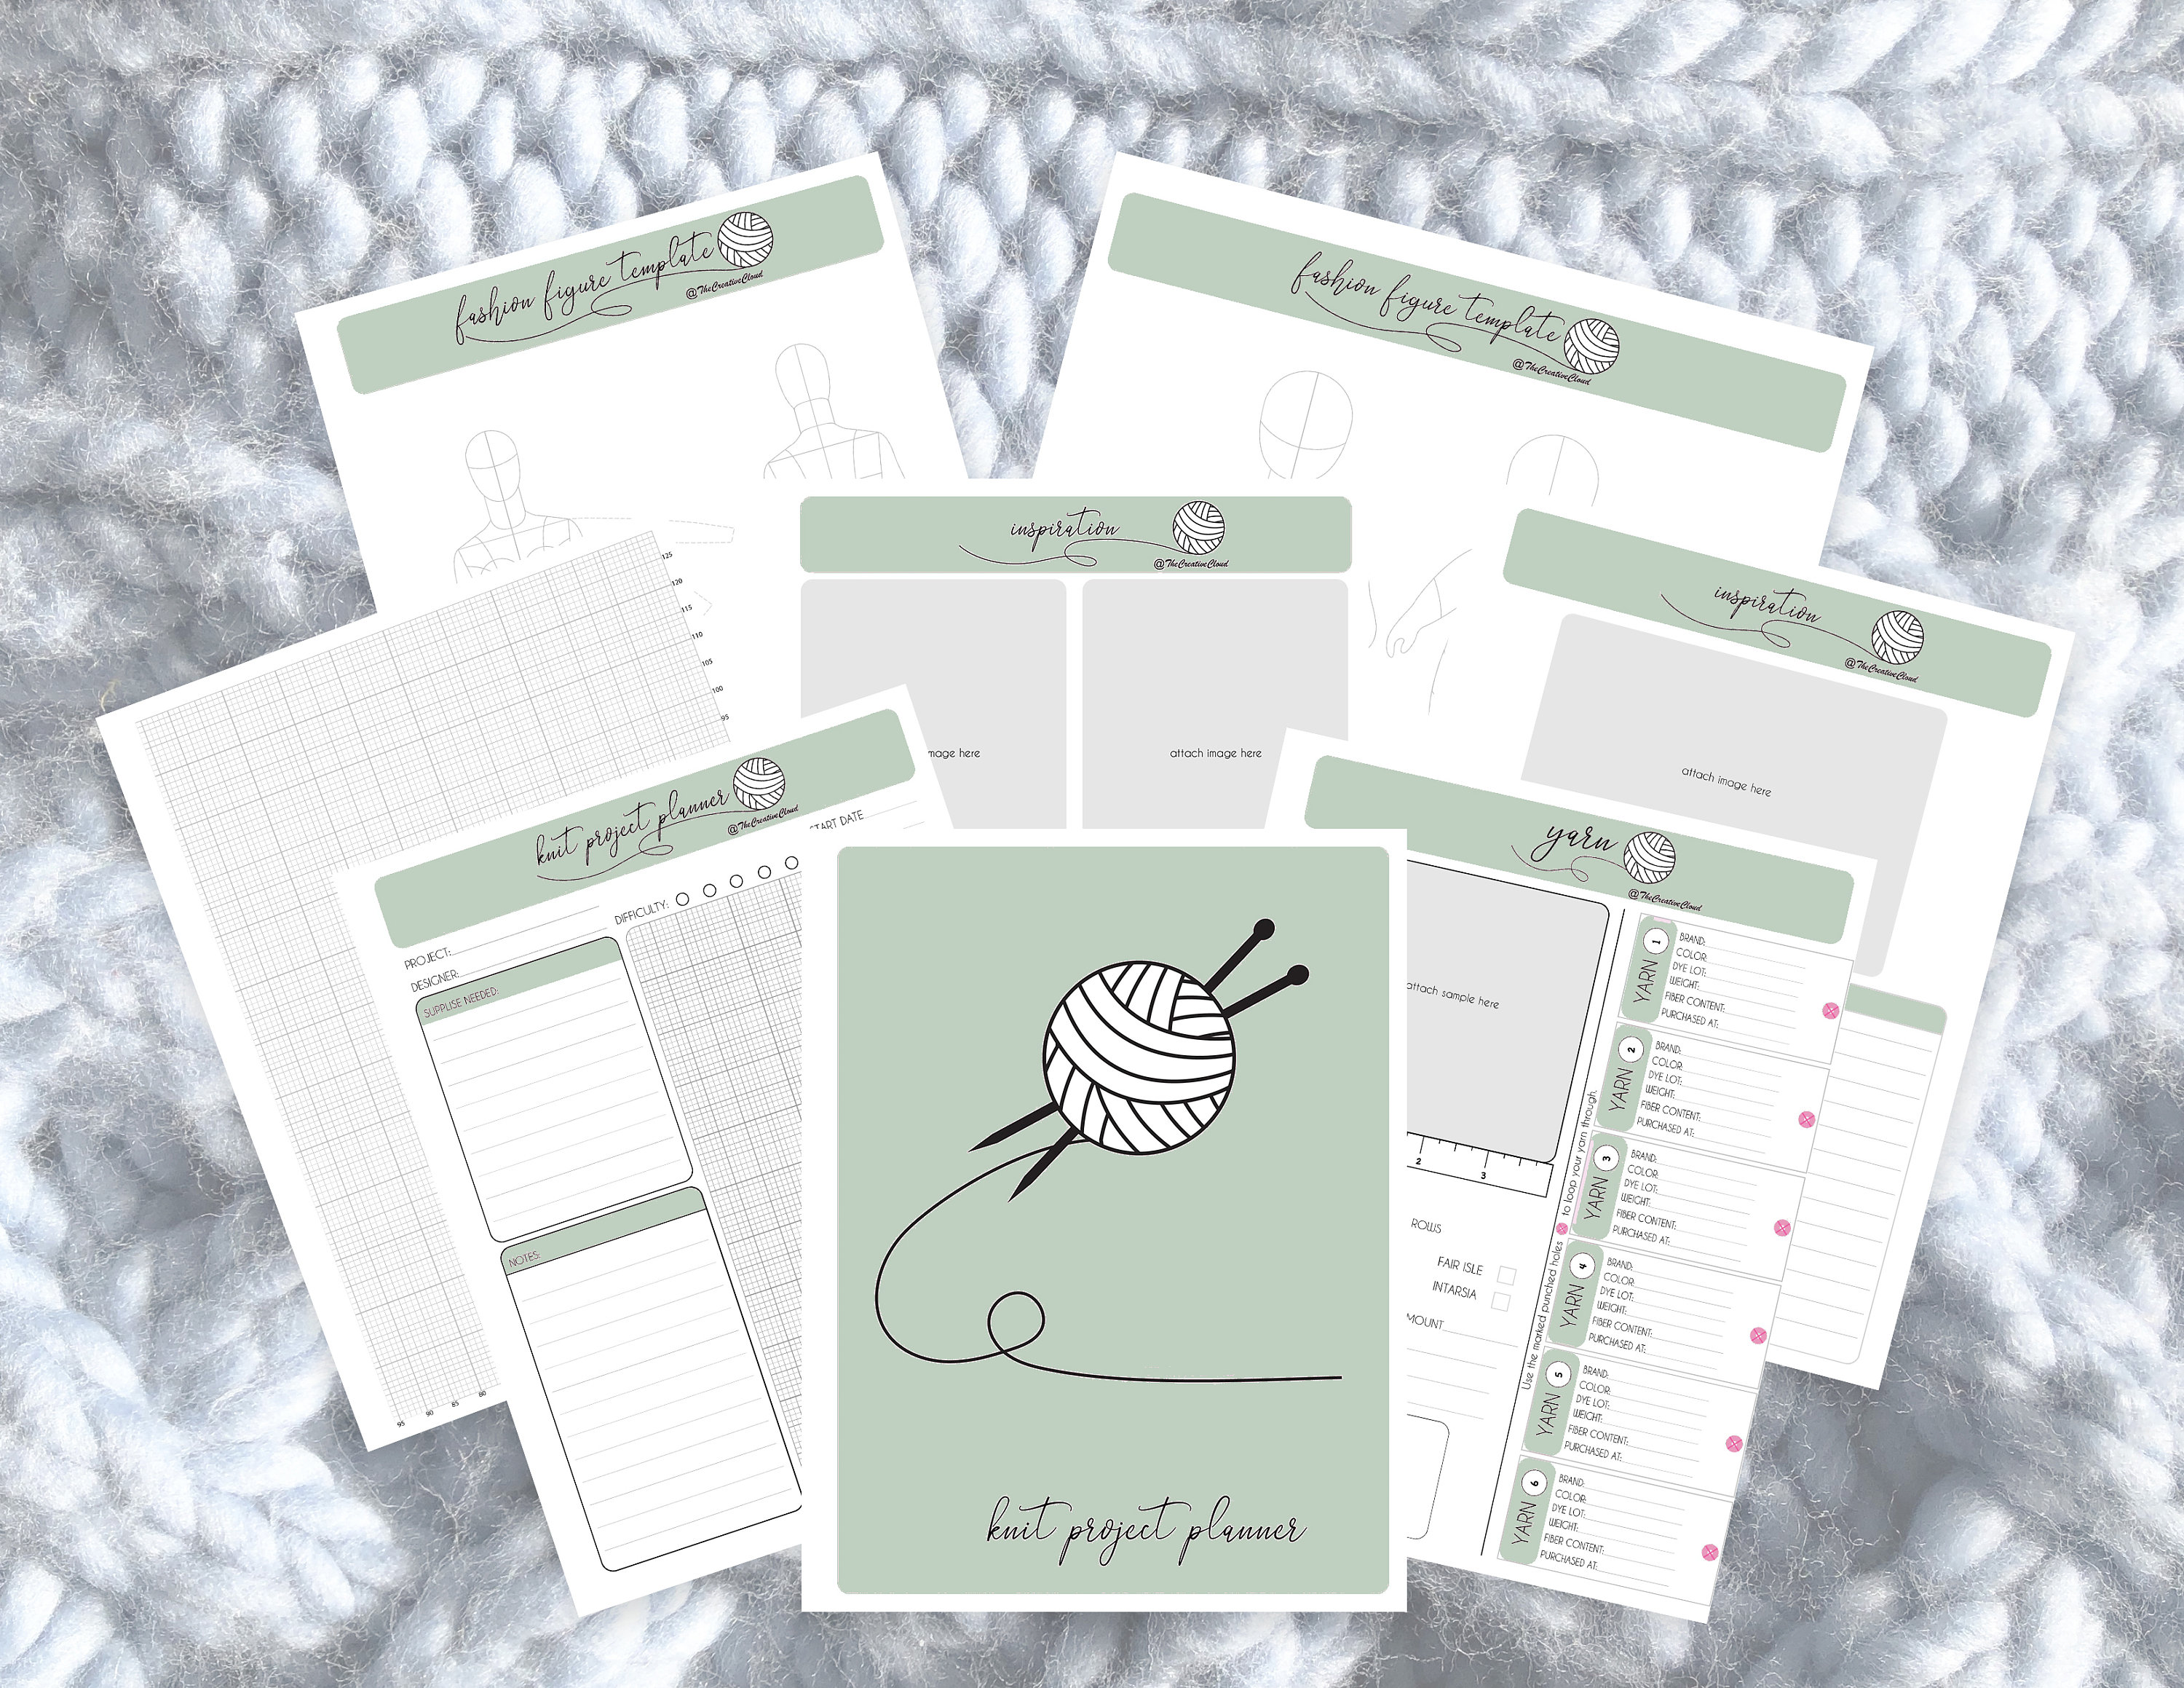 Knitting Project Planner knitting Planner / Knitting Journal A Place to  Keep Your Knitting Pattern Detailsspiral Bound &shipped to You 